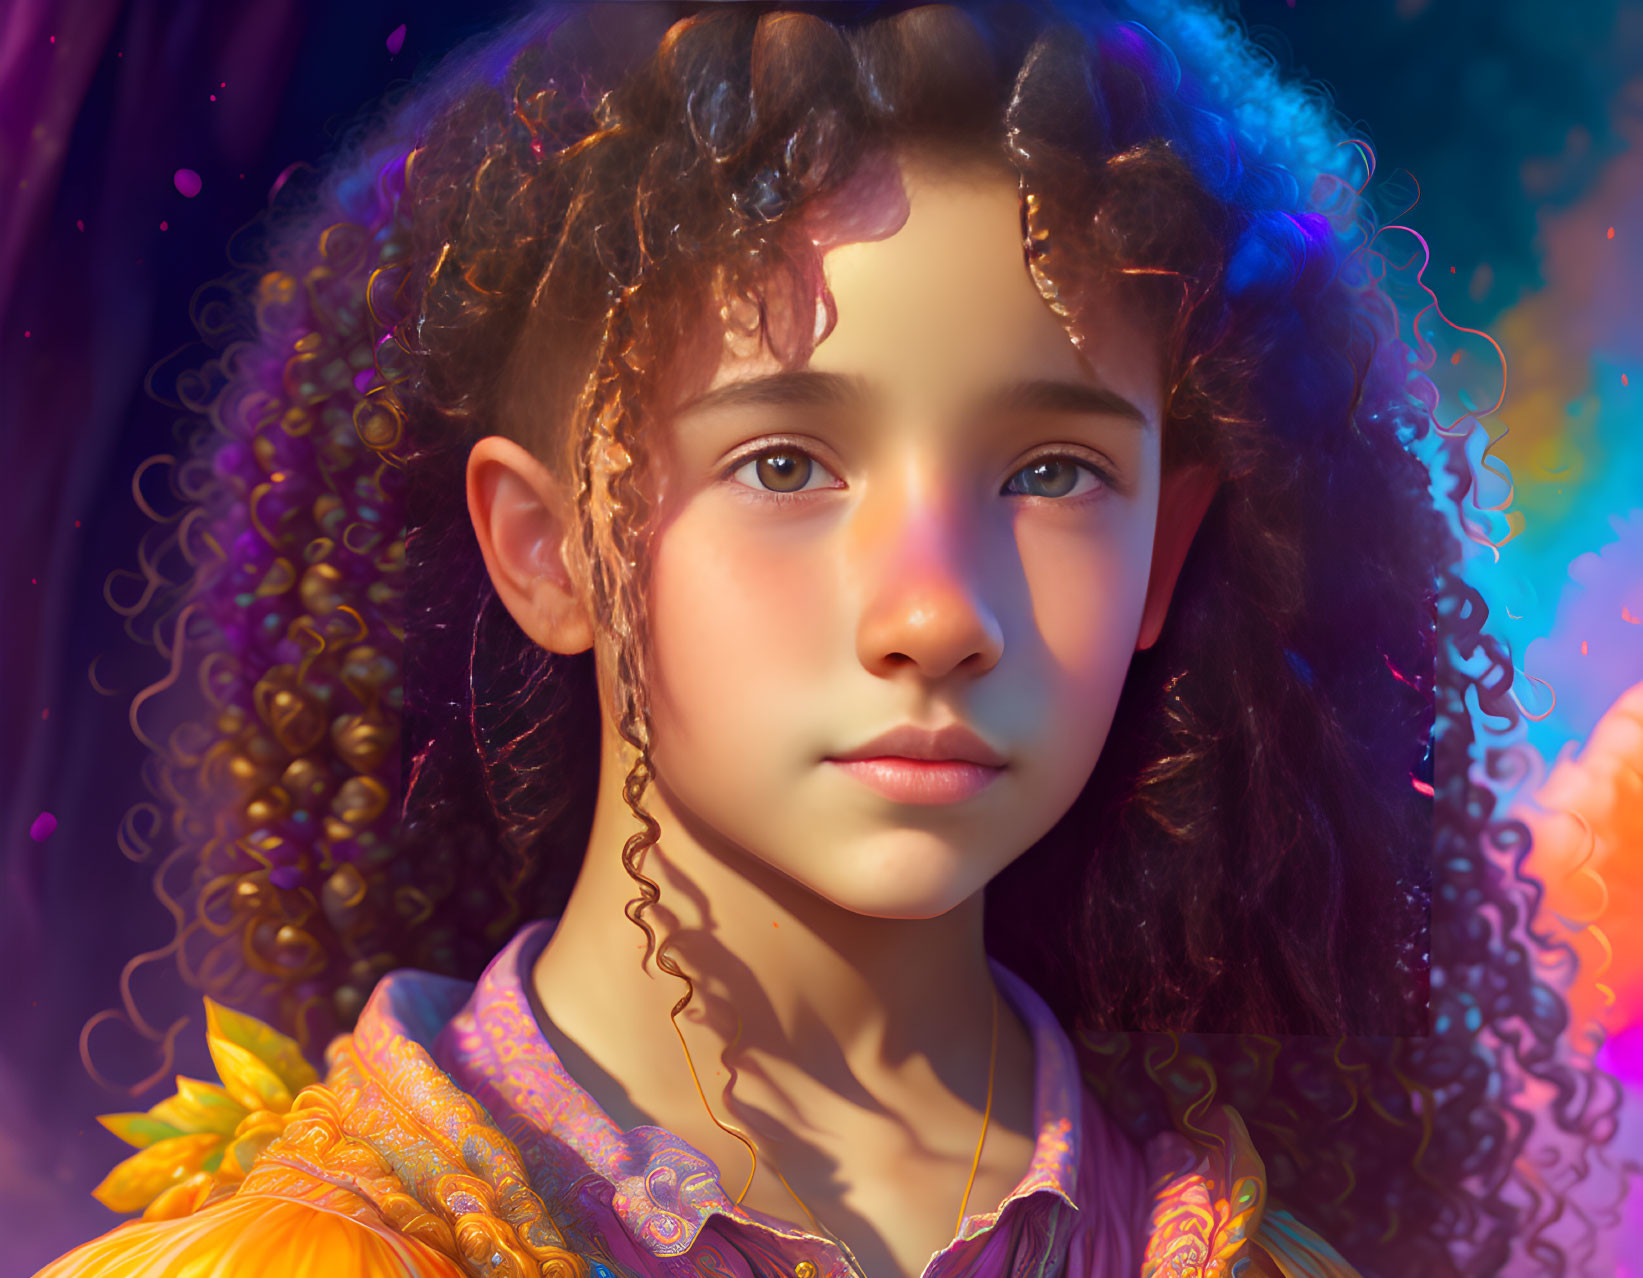 Young girl with curly hair and bokeh light effect portrait.